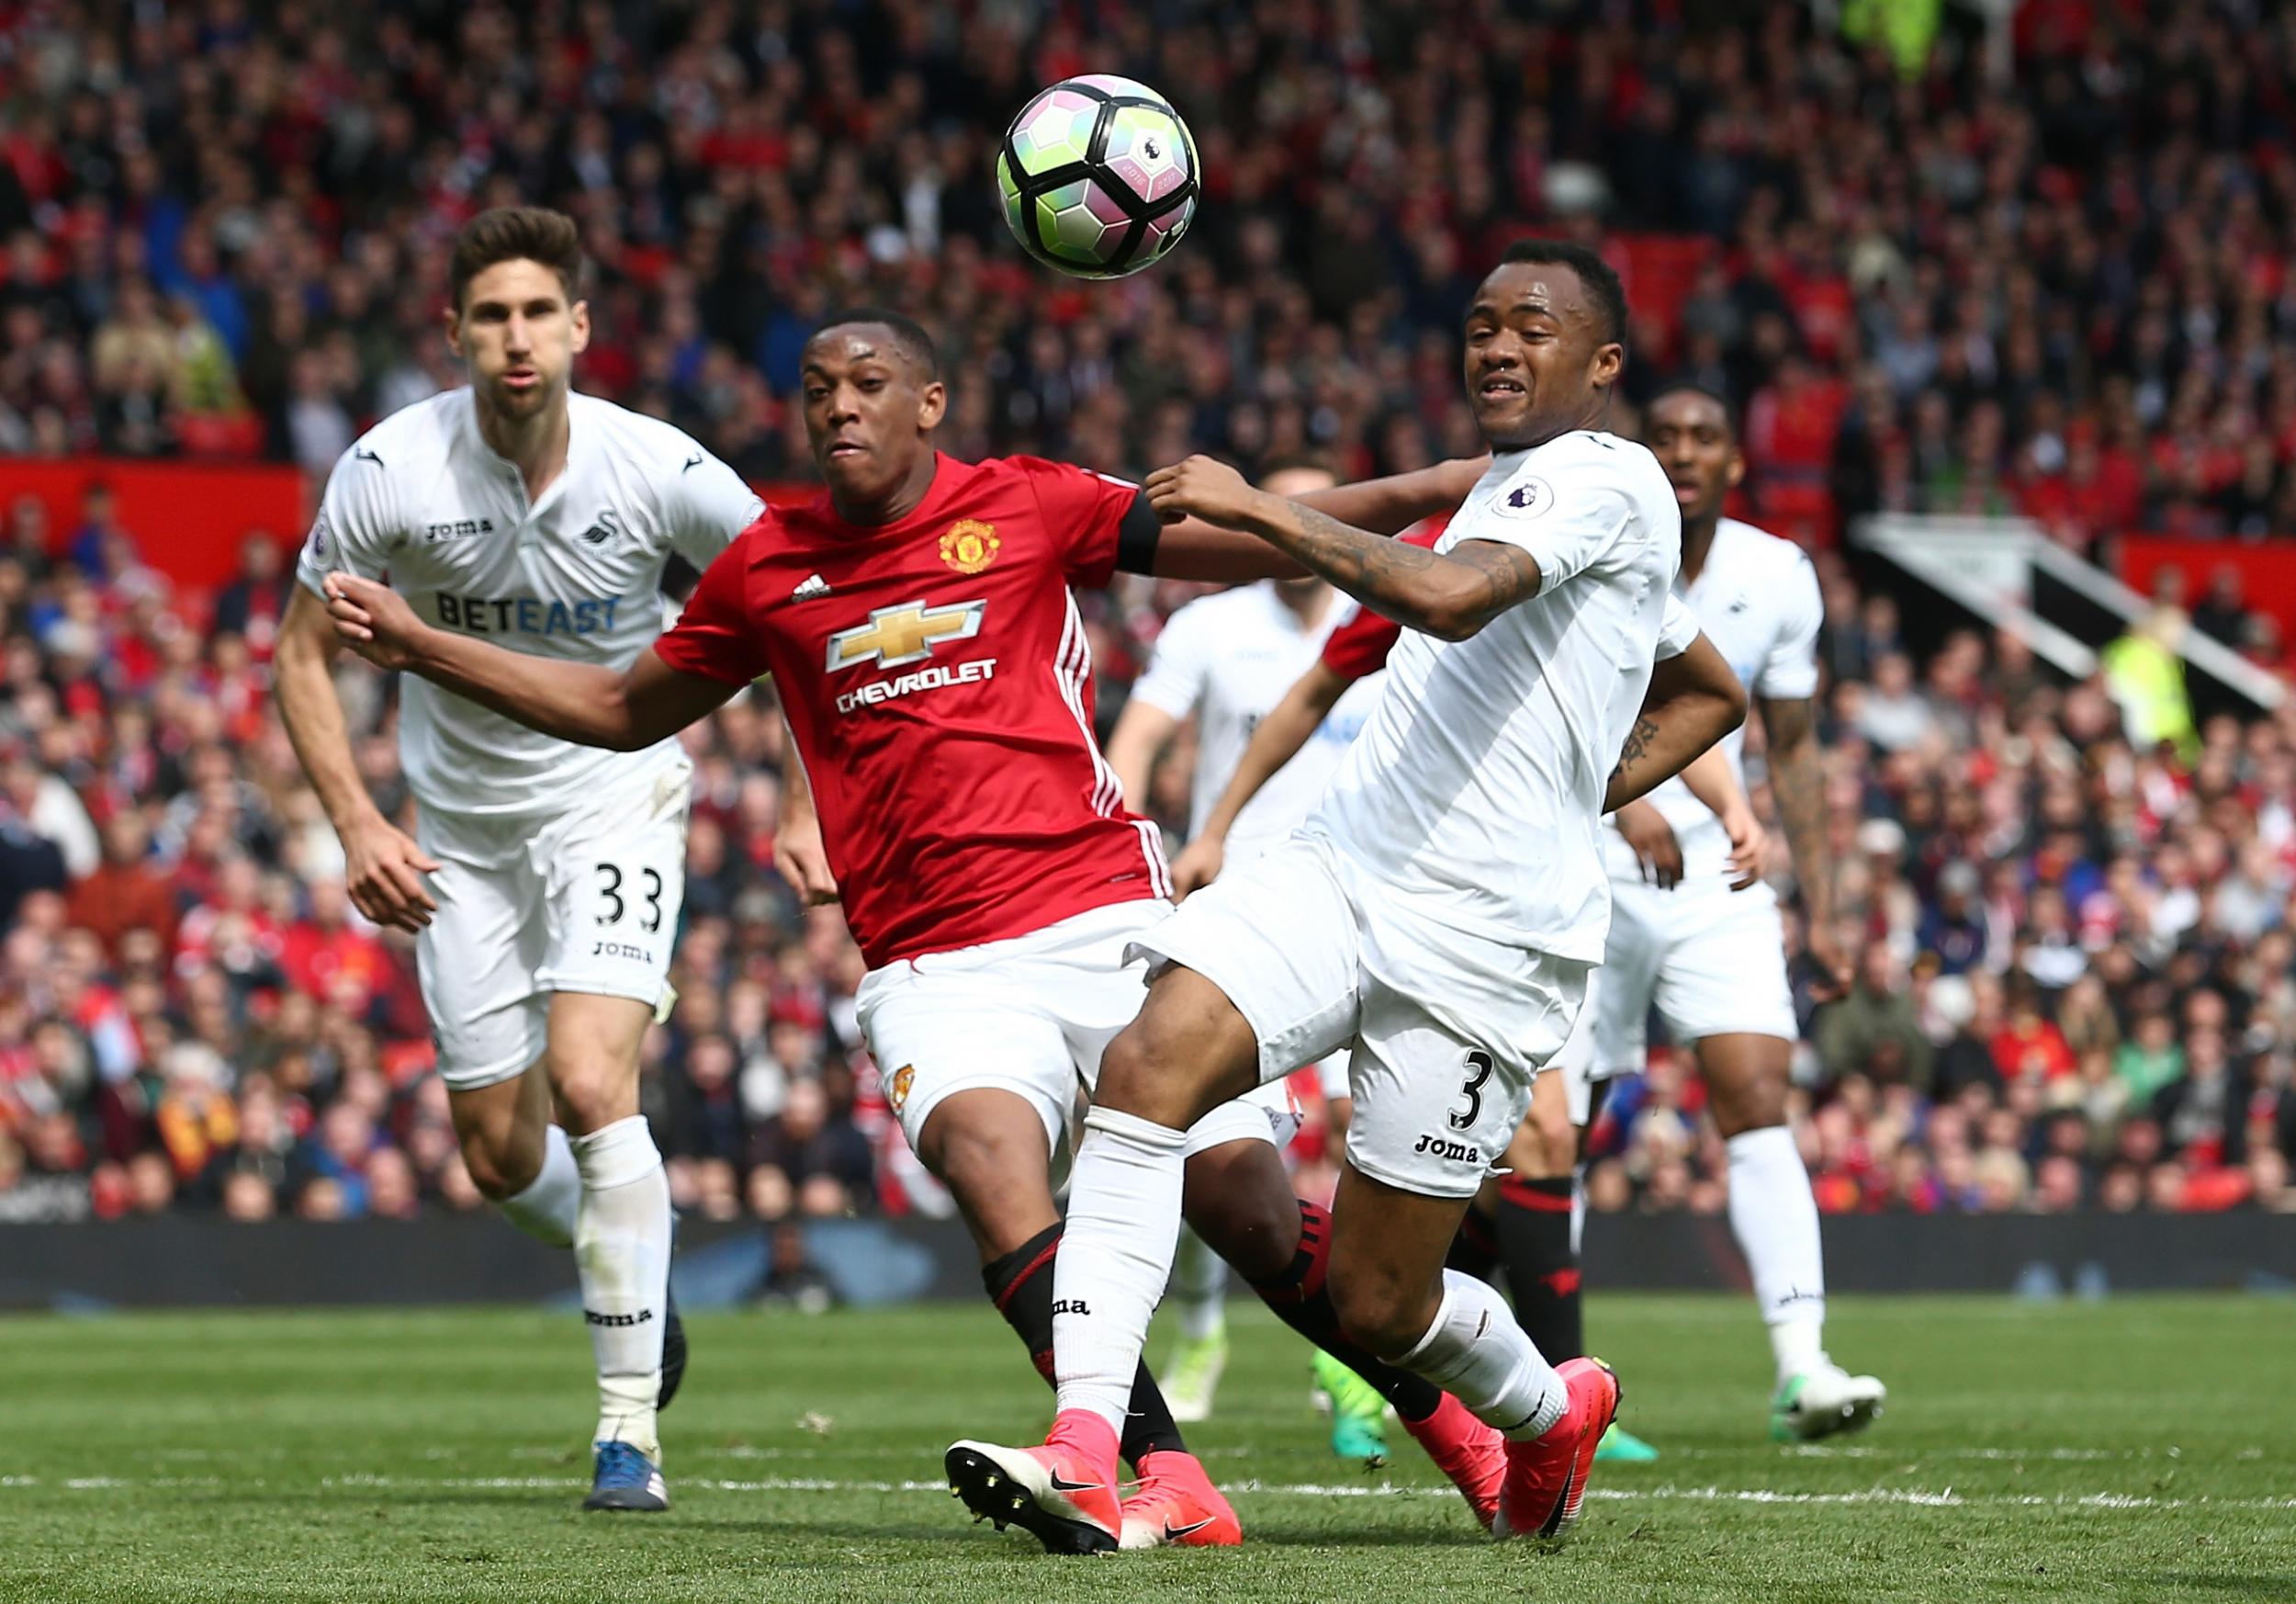 Swansea left Old Trafford with a hard-fought point